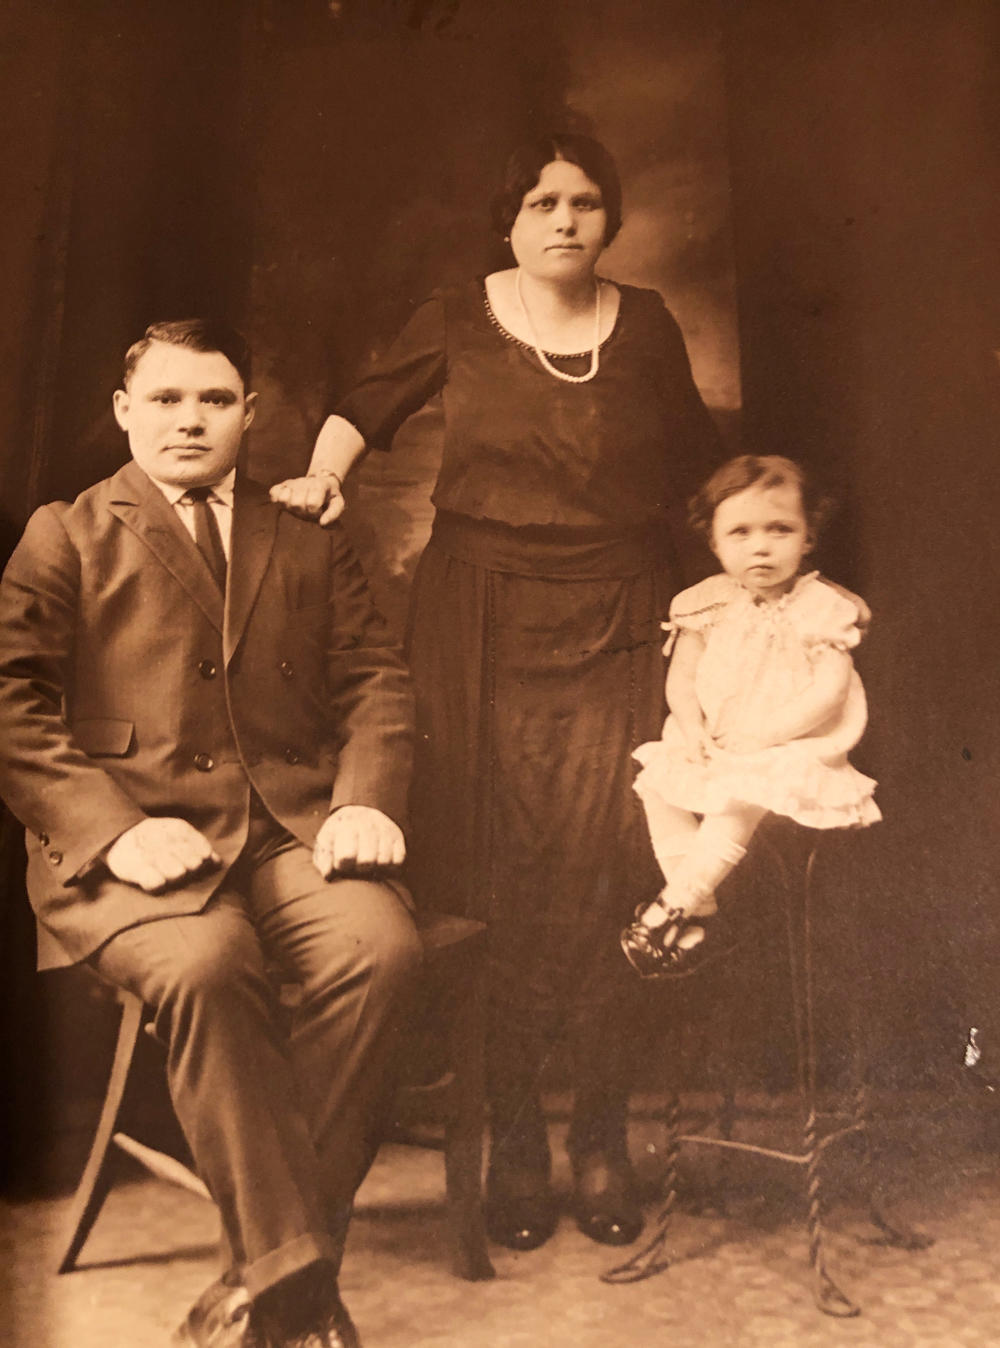 Moise and Ruchel Berkes, the author's grandparents, had their daughter Reba just days after arriving at Ellis Island in the early 1920s. Moise first sold apples on the street to support his suddenly expanded family (shown here when Reba was 2 or 3).